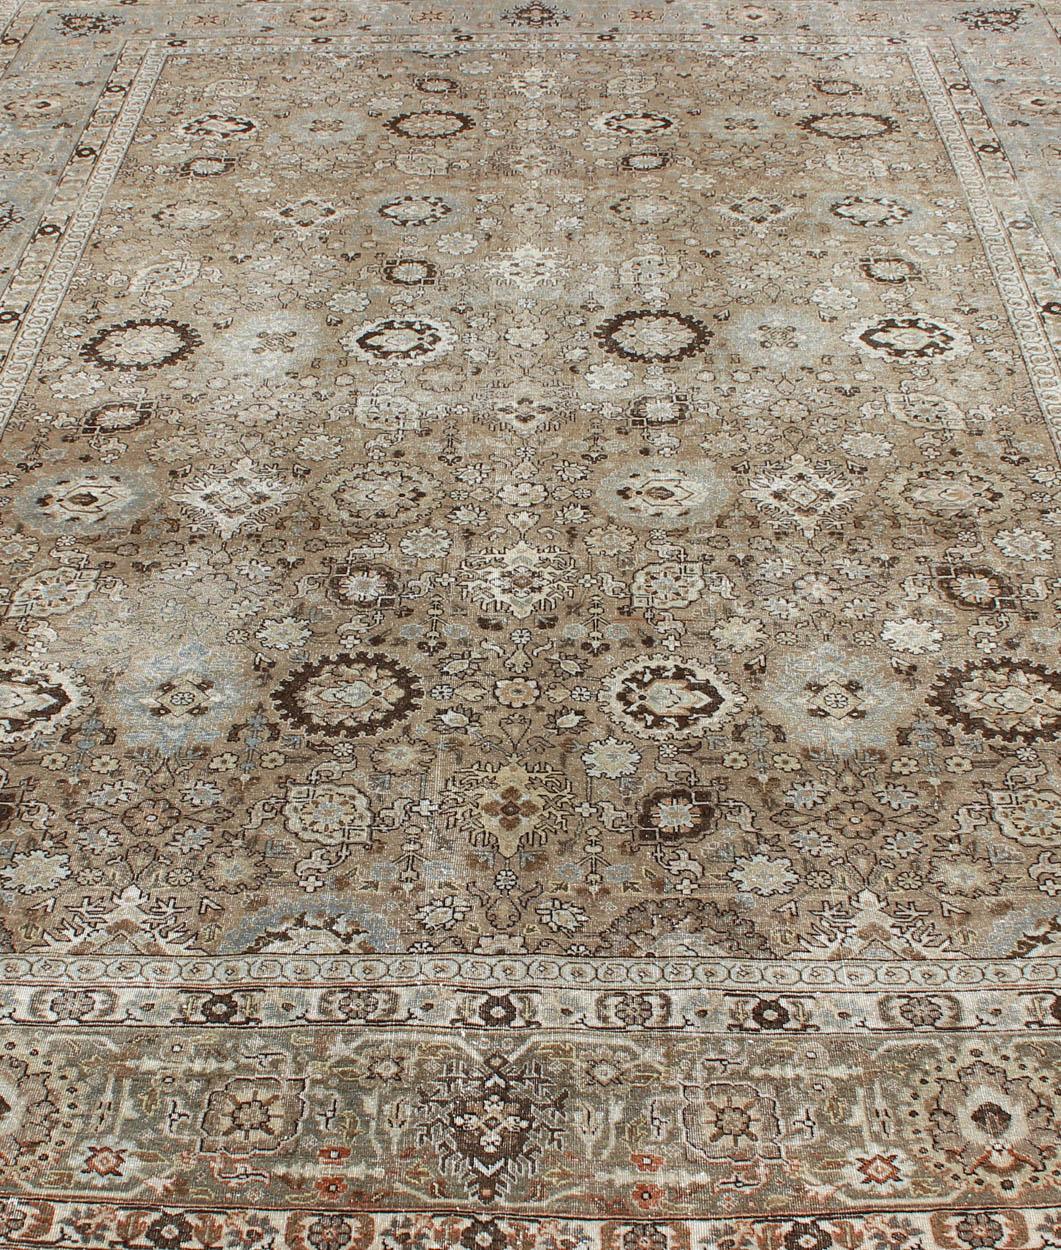 Antique Persian Tabriz Rug in Mocha, Camel, Brown, Gray and Light Blue For Sale 4